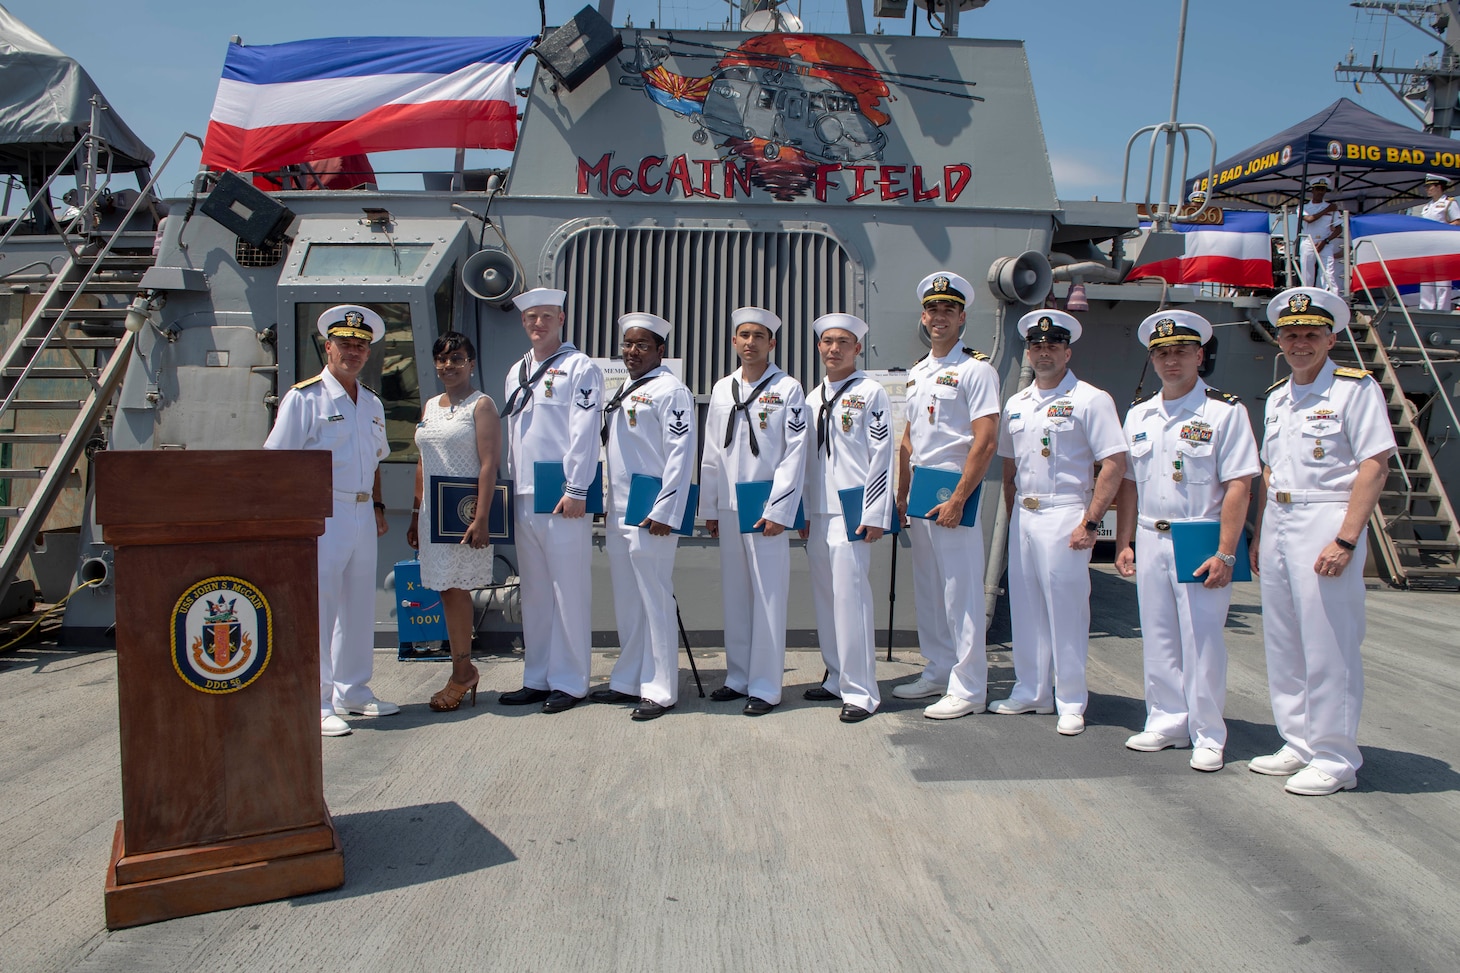 YOKOSUKA, Japan (July 2, 2019) Adm. John Aquilino, commander, U.S. Pacific Fleet (left) and Vice Adm. Phil Sawyer, commander, U.S. 7th Fleet (right) pose for a photo with awardees after an awards ceremony recognizing 50 Sailors who distinguished themselves for their bravery and contributions to damage control efforts during the 2017 collision aboard the guided-missile destroyer USS John S. McCain (DDG 56), currently berthed at Commander, Fleet Activities Yokosuka, Japan. The awards represent all those who distinguished themselves by heroism, outstanding achievement or meritorious service following the ship’s collision with the merchant vessel Alnic MC Aug. 21, 2017.